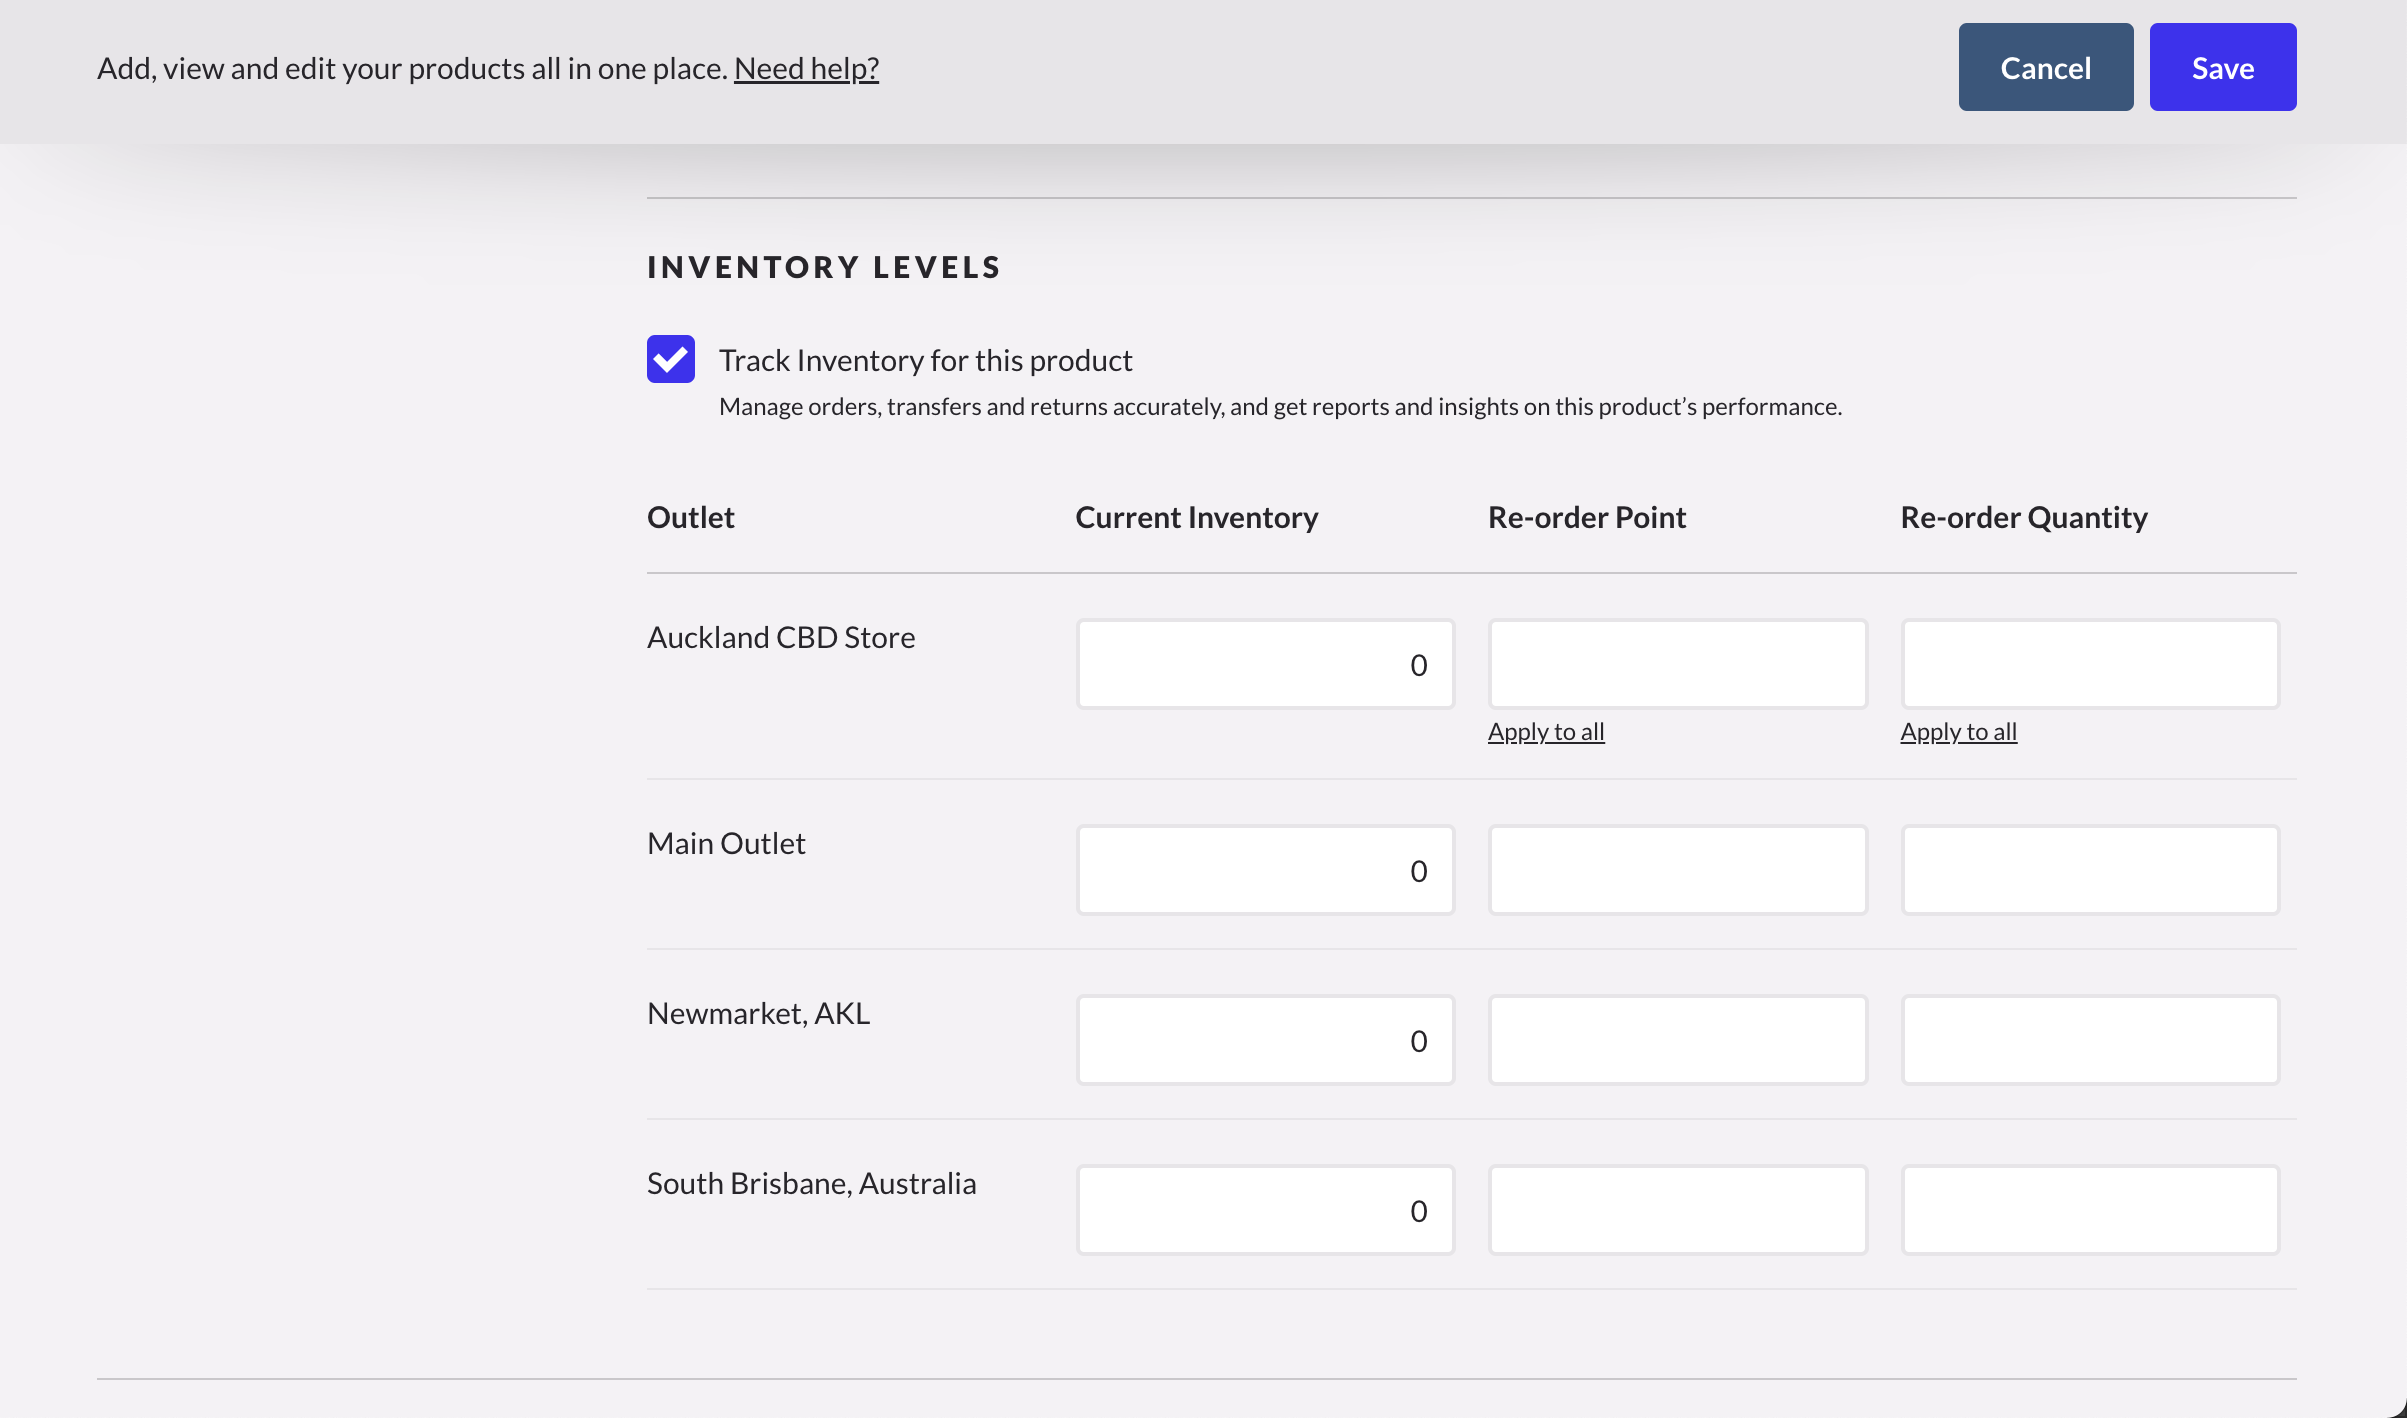 Add Product Inventory Levels page with input fields.